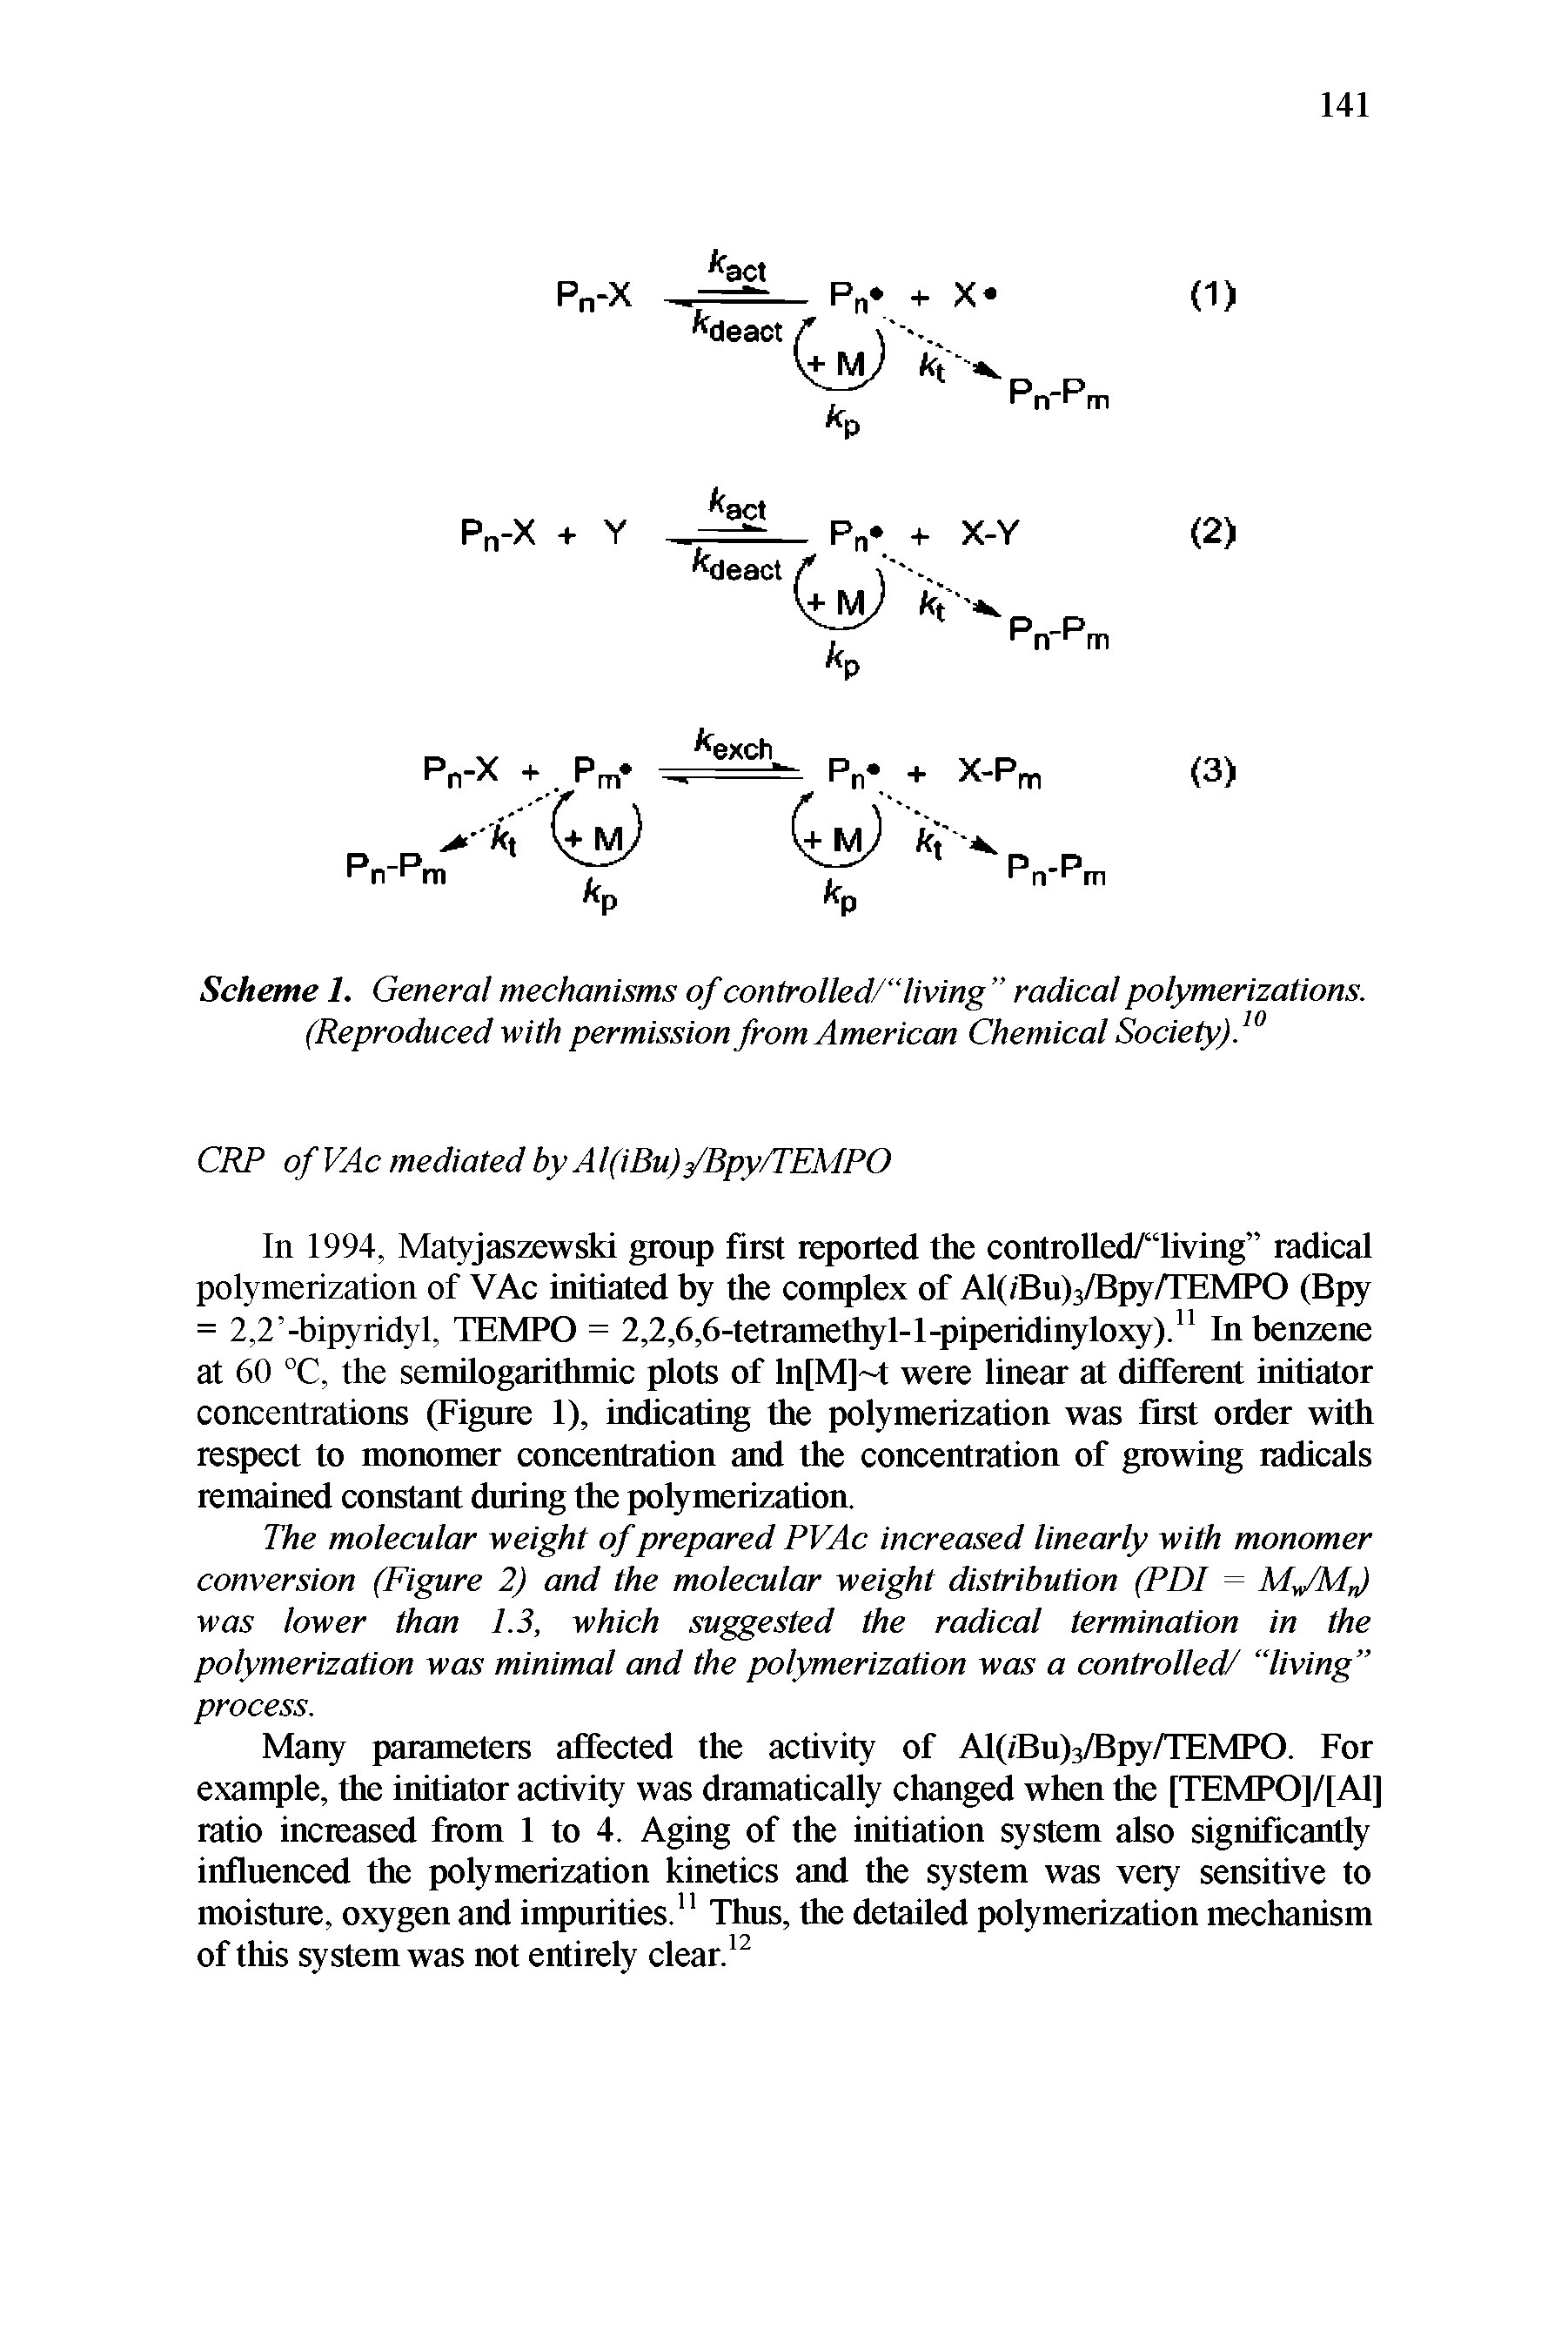 Scheme 1. General mechanisms of controlled/" living radical polymerizations. (Reproduced with permission from American Chemical Society).